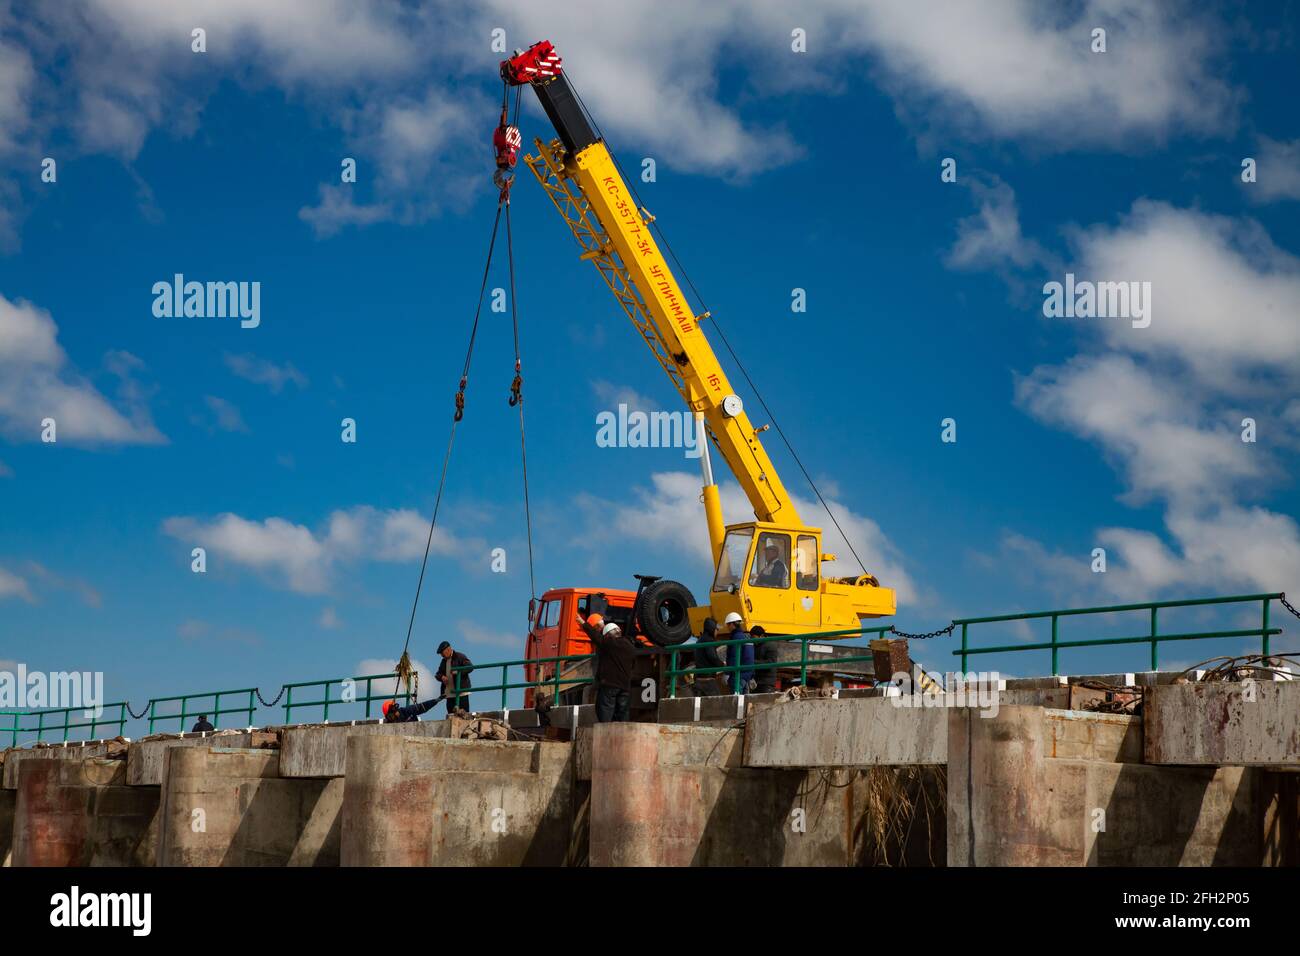 Kok-aral,Kazakhstan:Small Aral Sea Kok-aral dam.Mobile crane and workers lifting water shutters in flood Blue sky, white clouds. Stock Photo